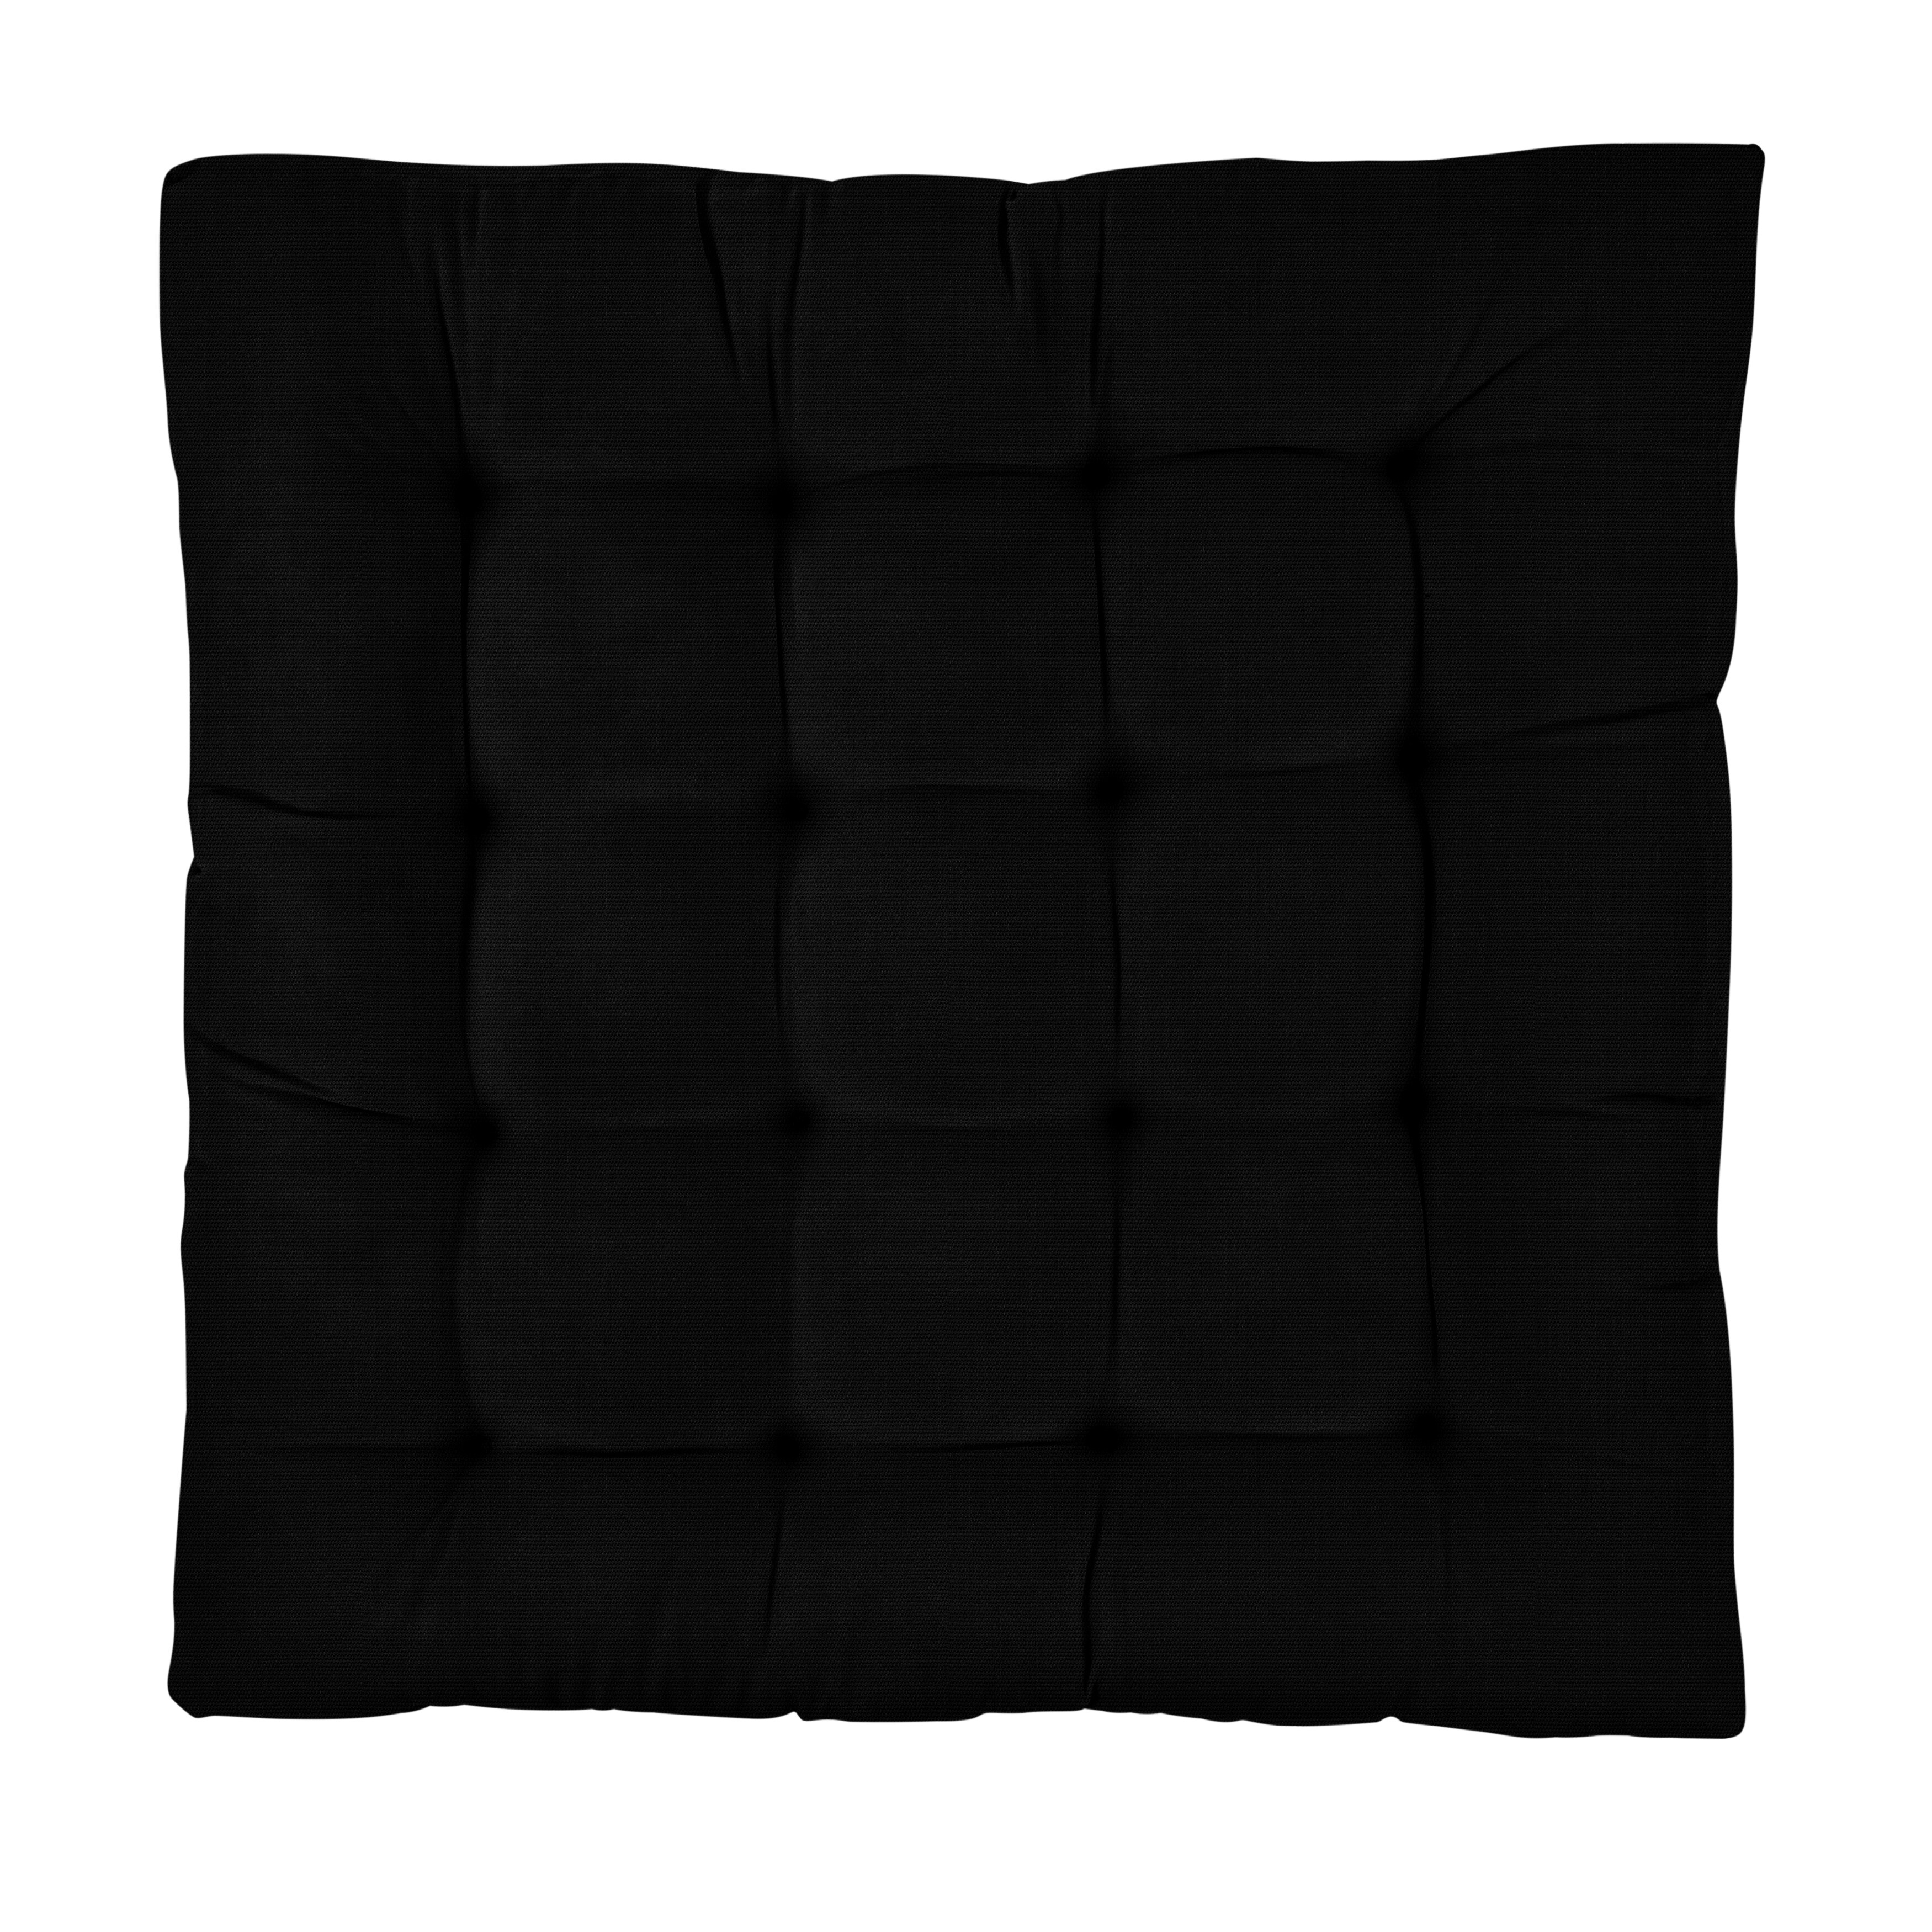 Mozaic Company Humble + Haute Large Sunbrella Square Tufted Floor Pillow  with Handle 40 in x 40 in x 5 - Canvas Black